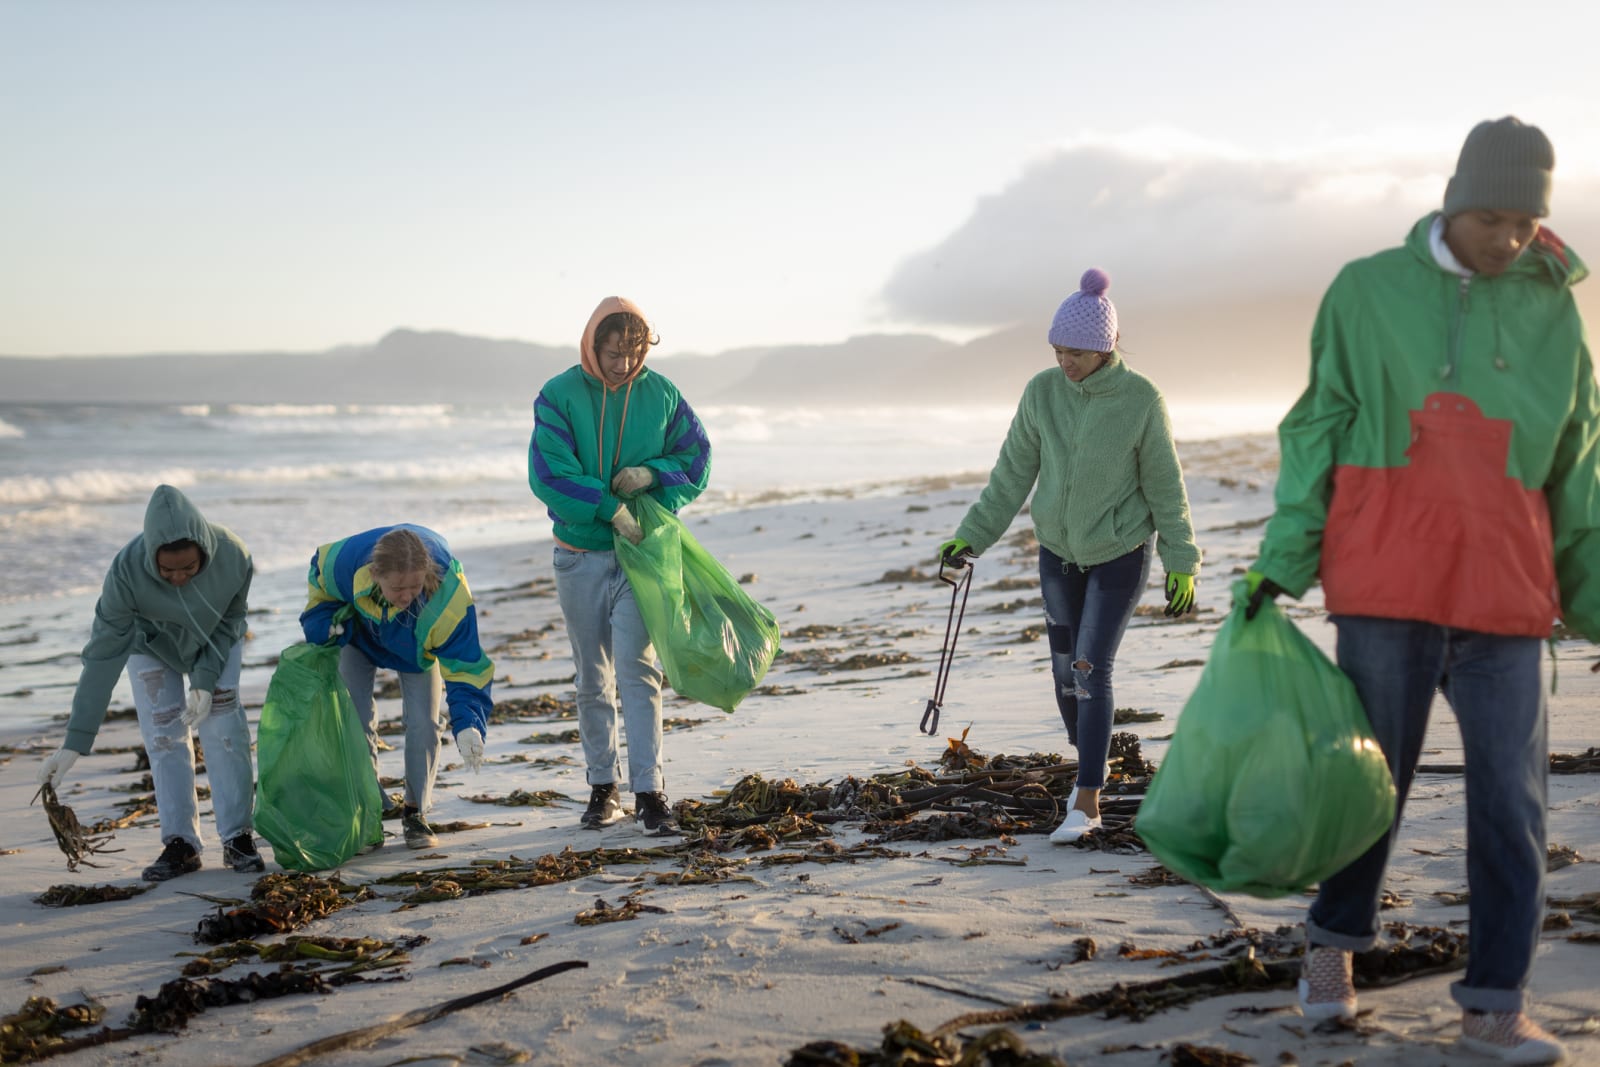 group of people picking up rubbish on beach and placing it into plastic green bags